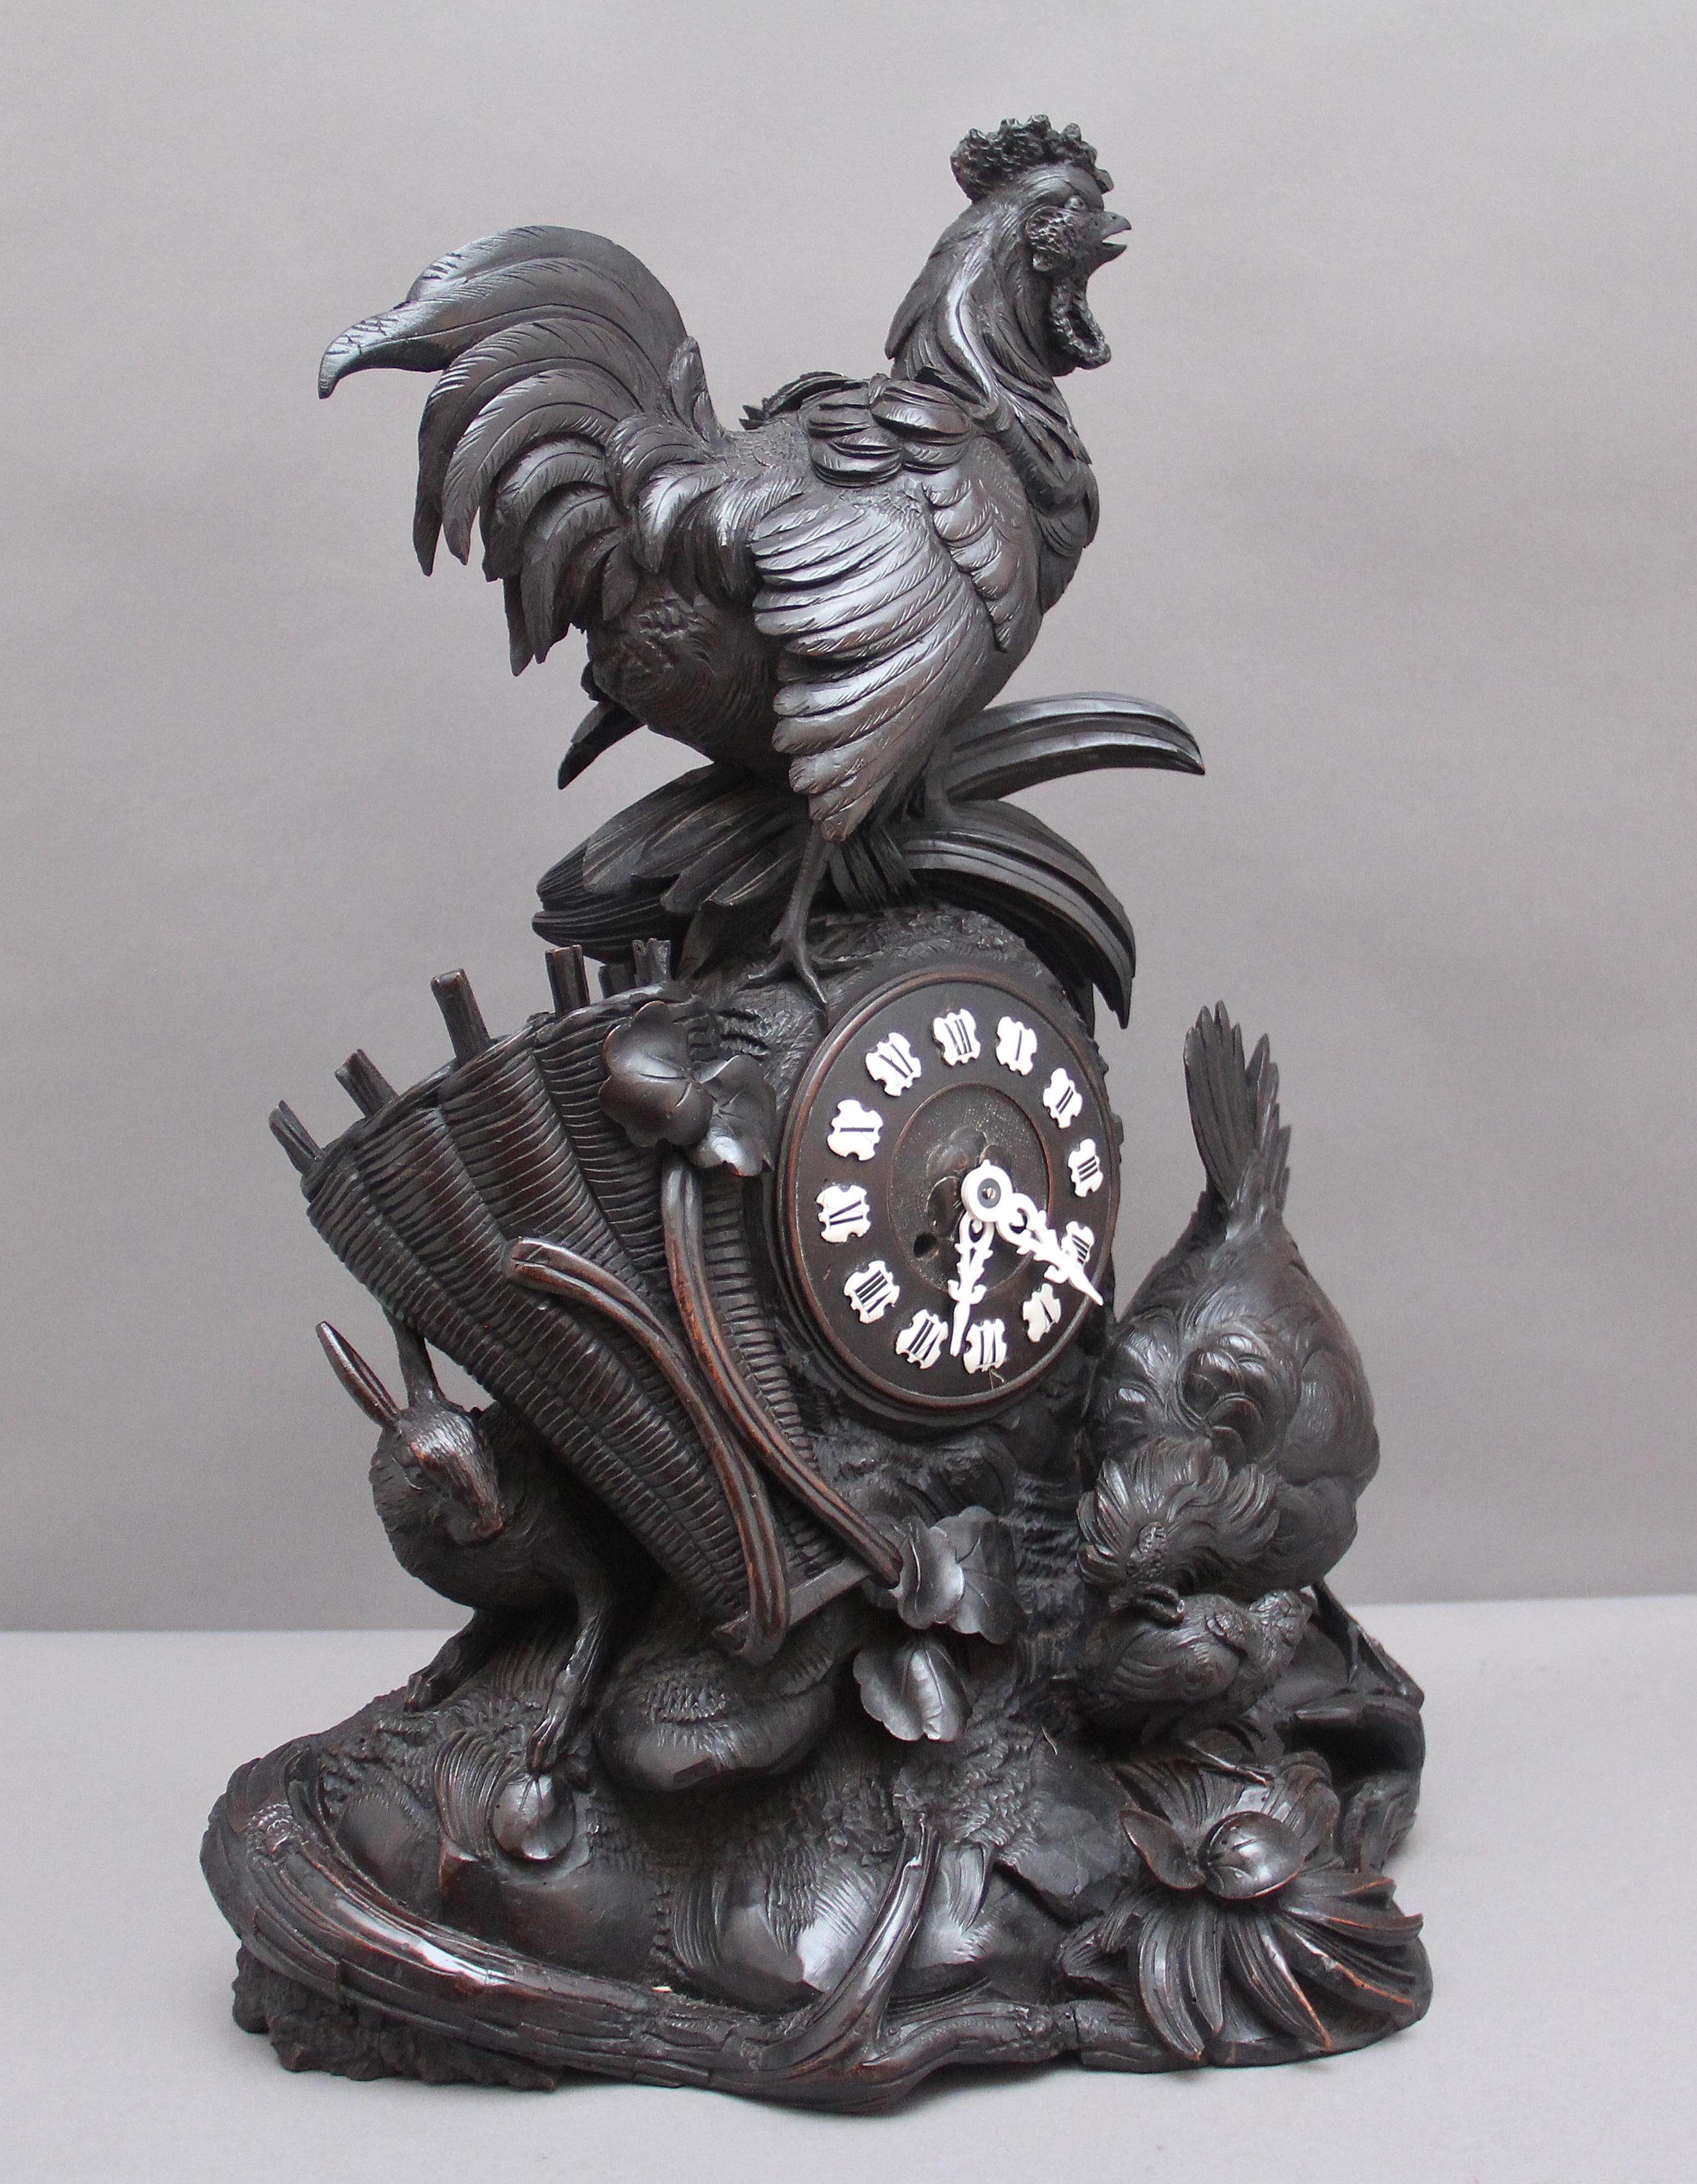 A lovely quality 19th century black forest mantle clock, the clock dial located at the centre within a farmyard scene consisting of a cockerel at the top and a chicken, baby chick and hare below surrounded by various foliage, the clock strikes on